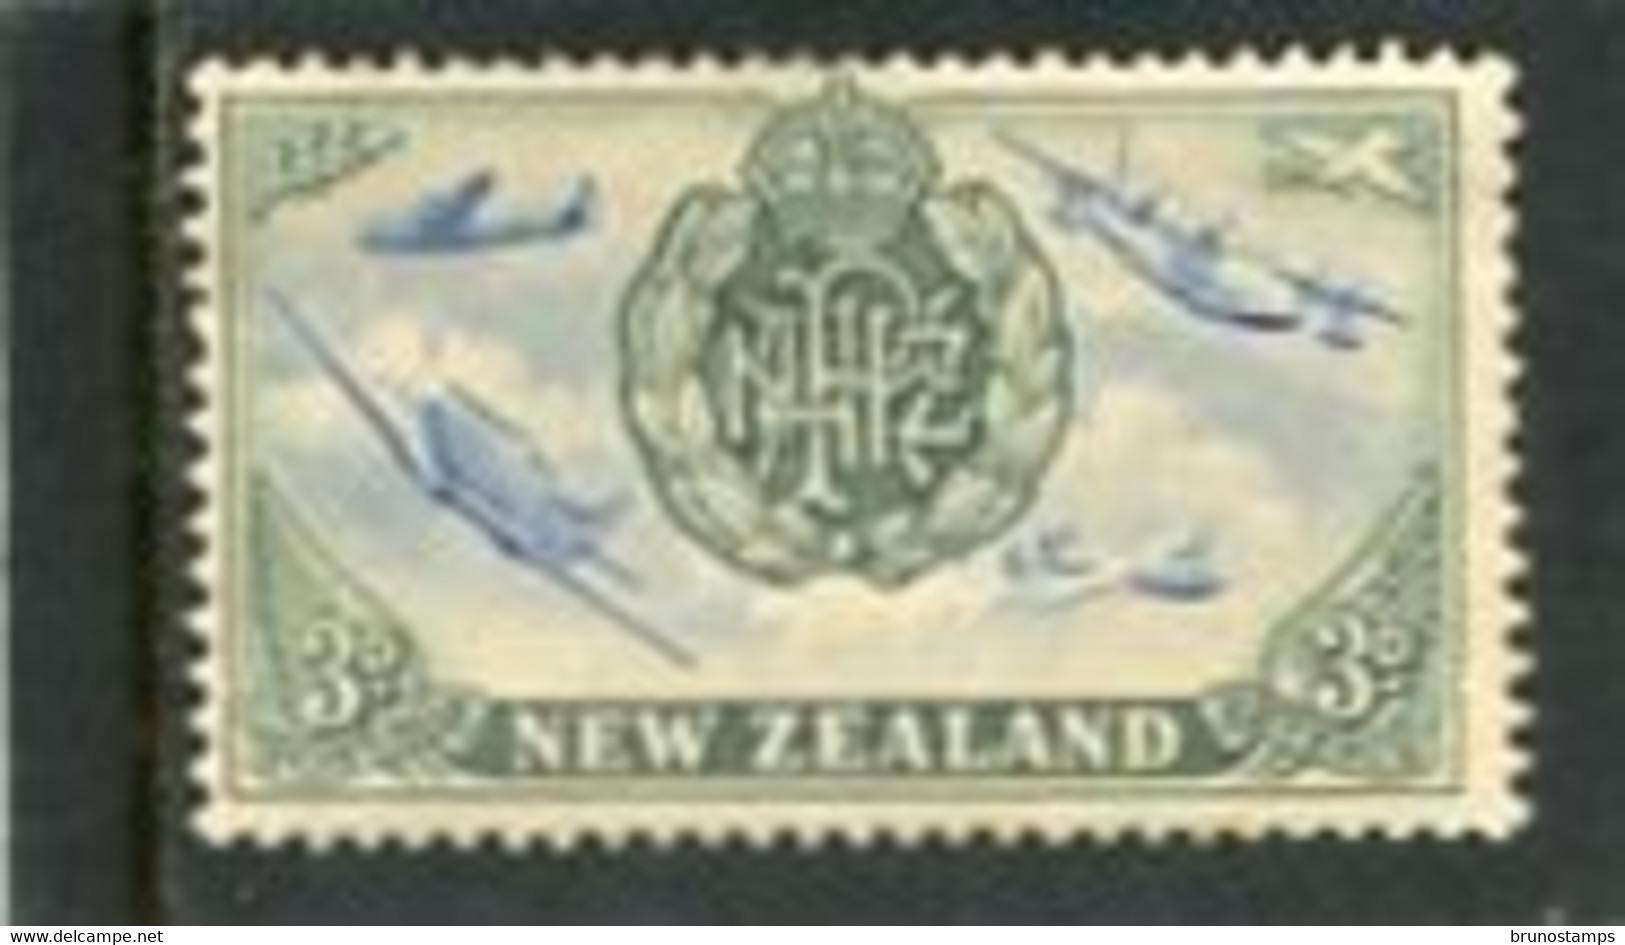 NEW ZEALAND - 1946  3d PEACE  MINT - Unused Stamps